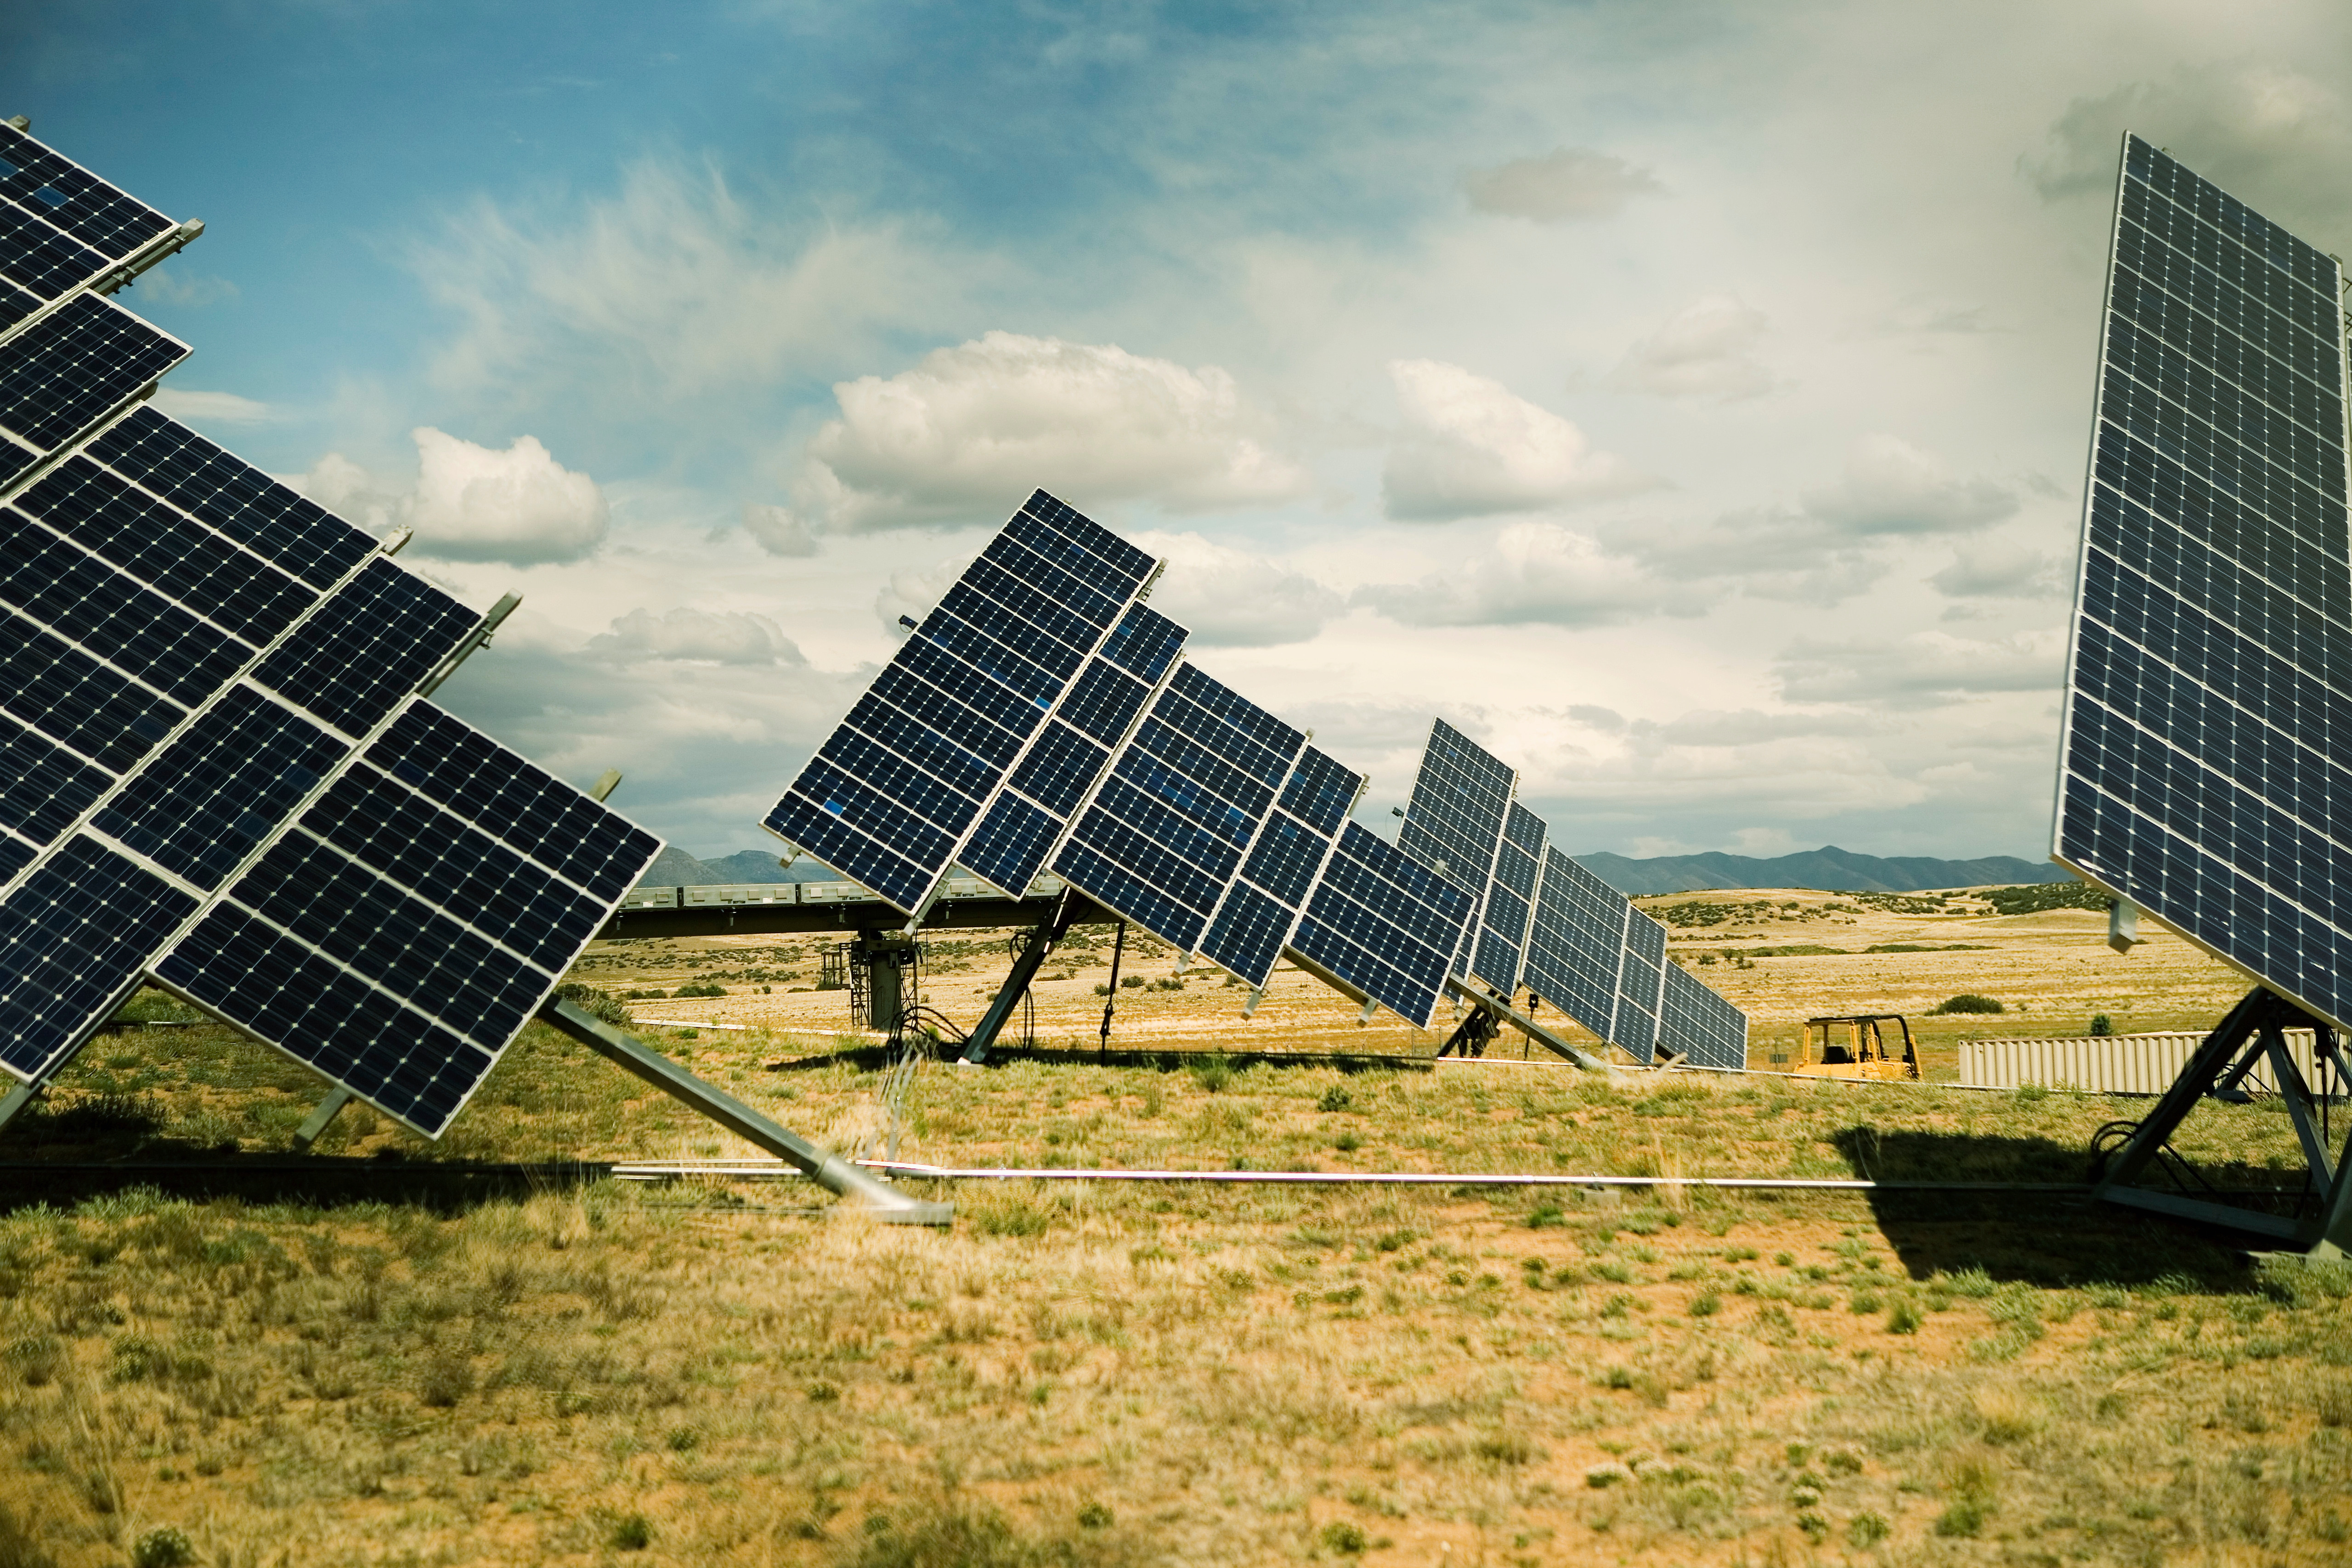 Germany’s Federal Network Agency announced that bids for 1.95GW of ground-mounted solar systems